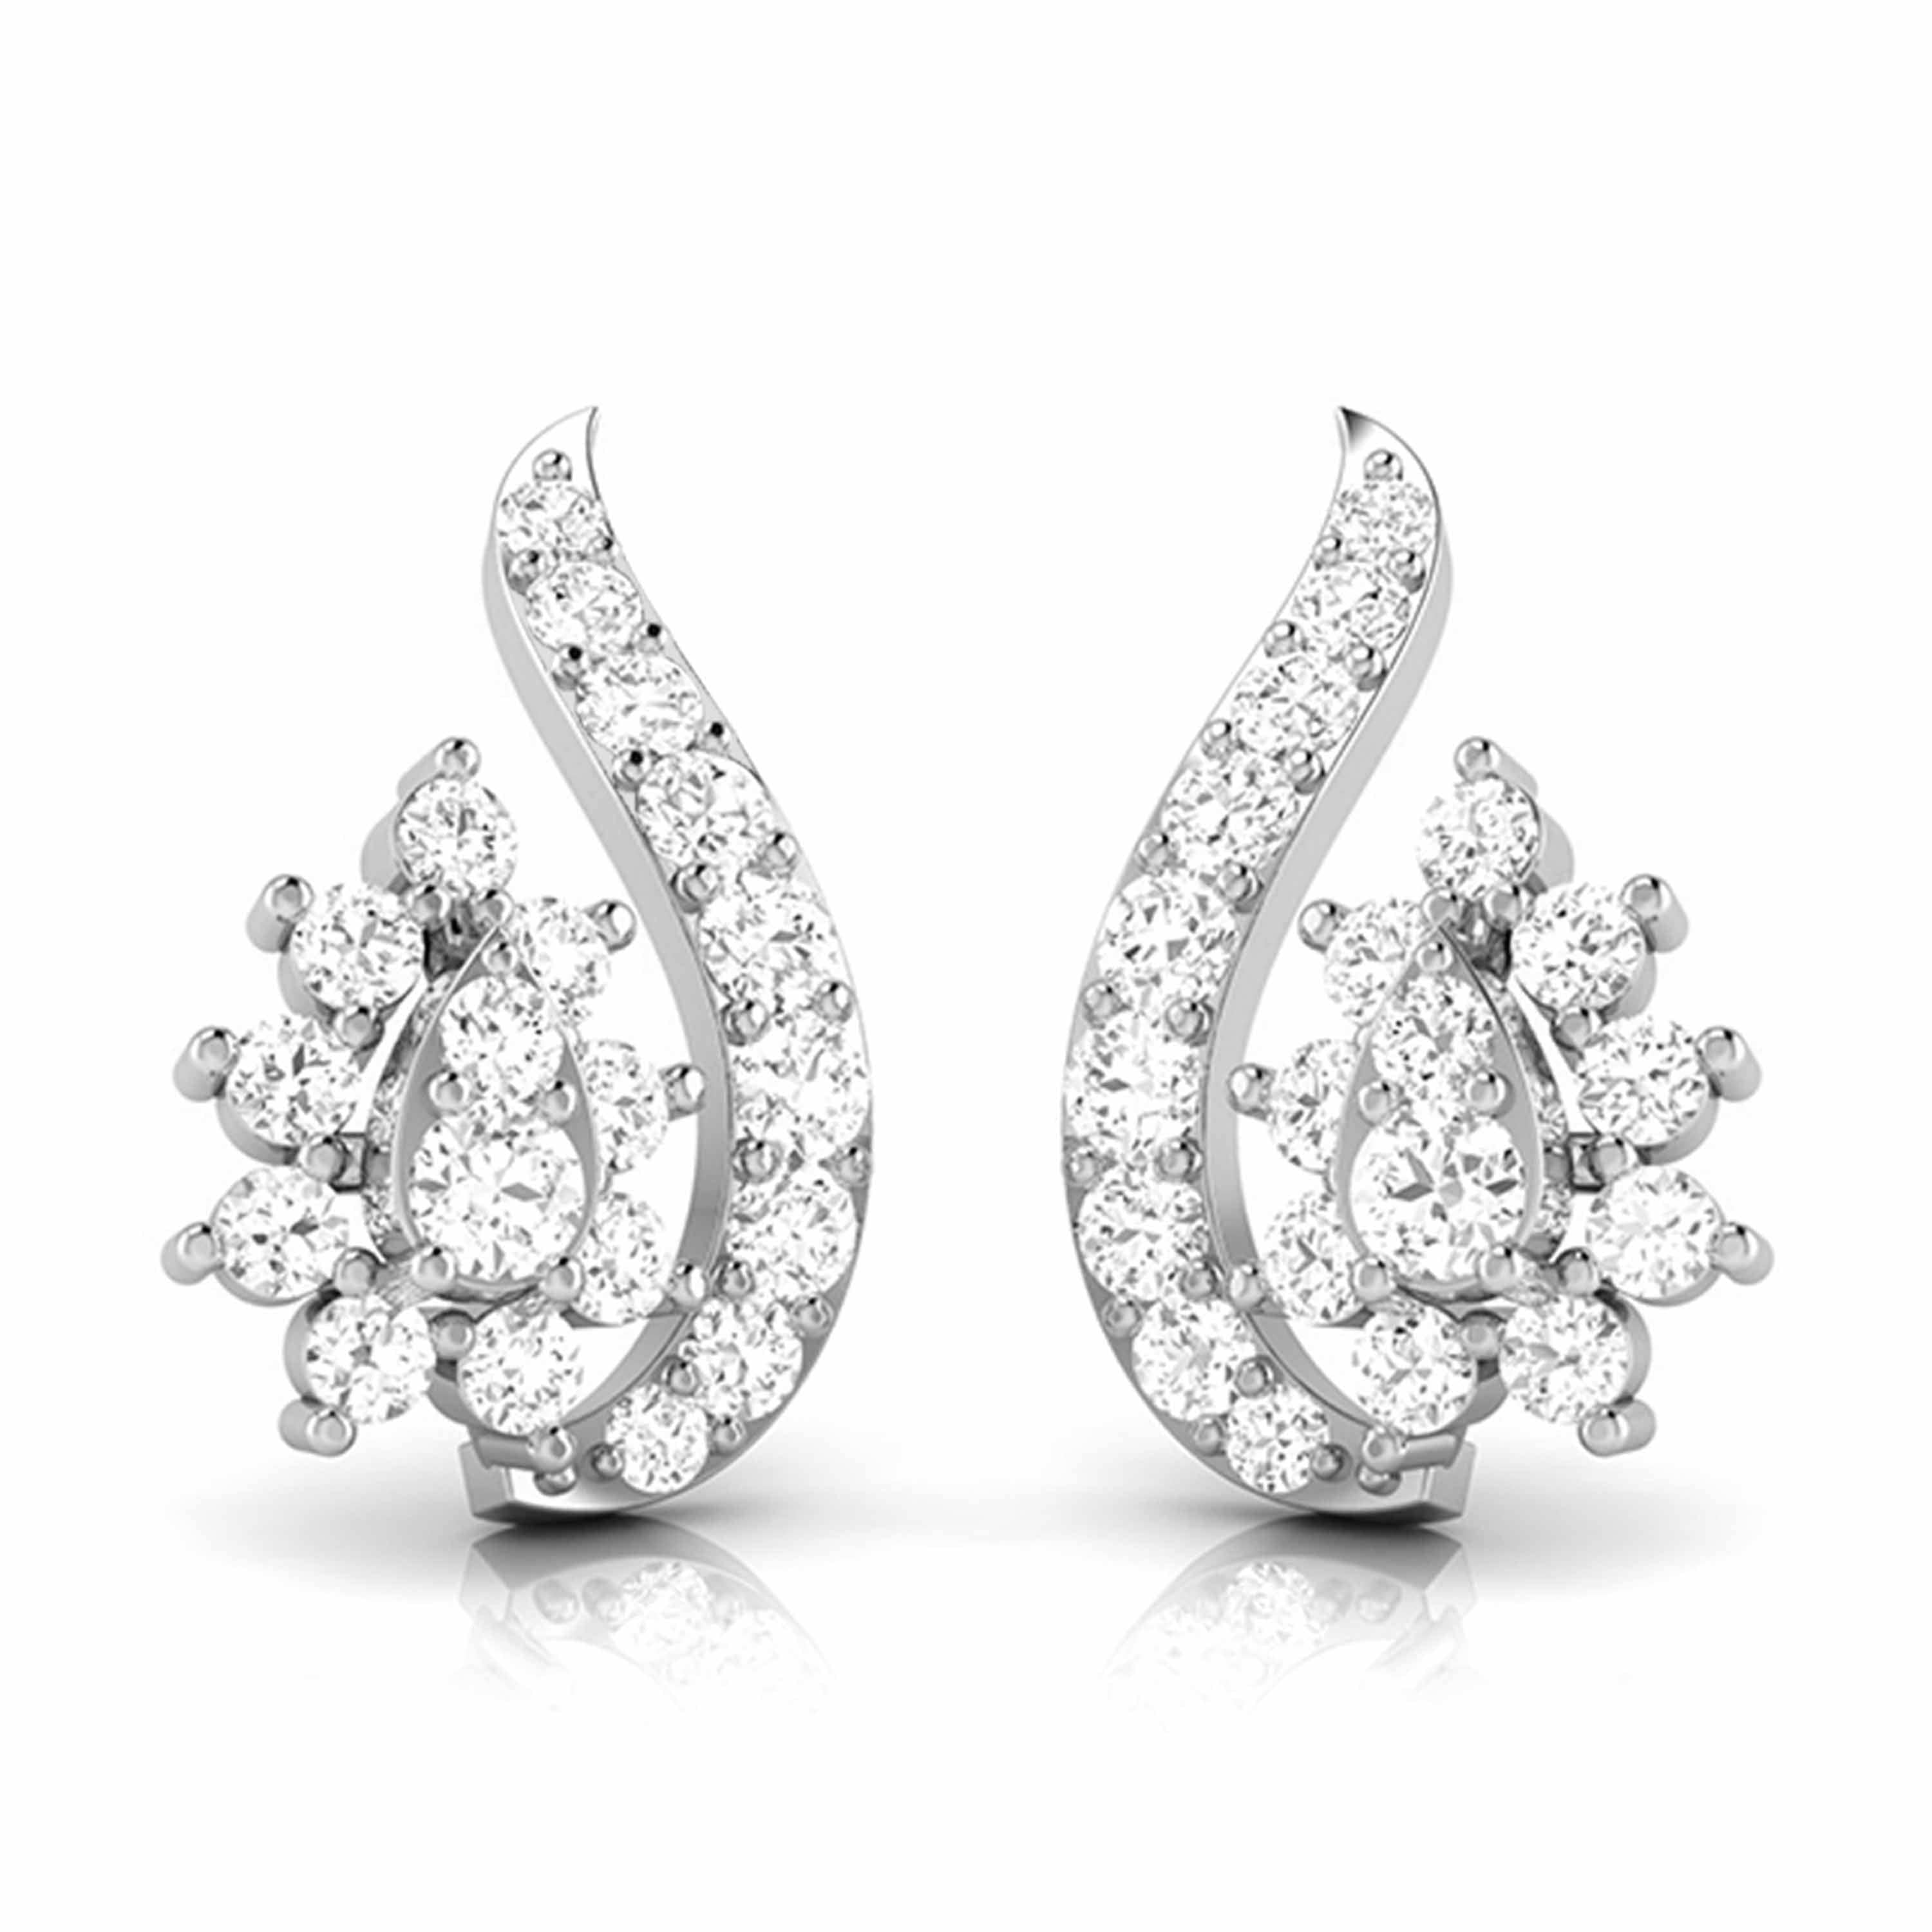 Affordable Solitaire Diamond Stud Earrings 10K White Gold 0.15ct by  Luxurman 001242